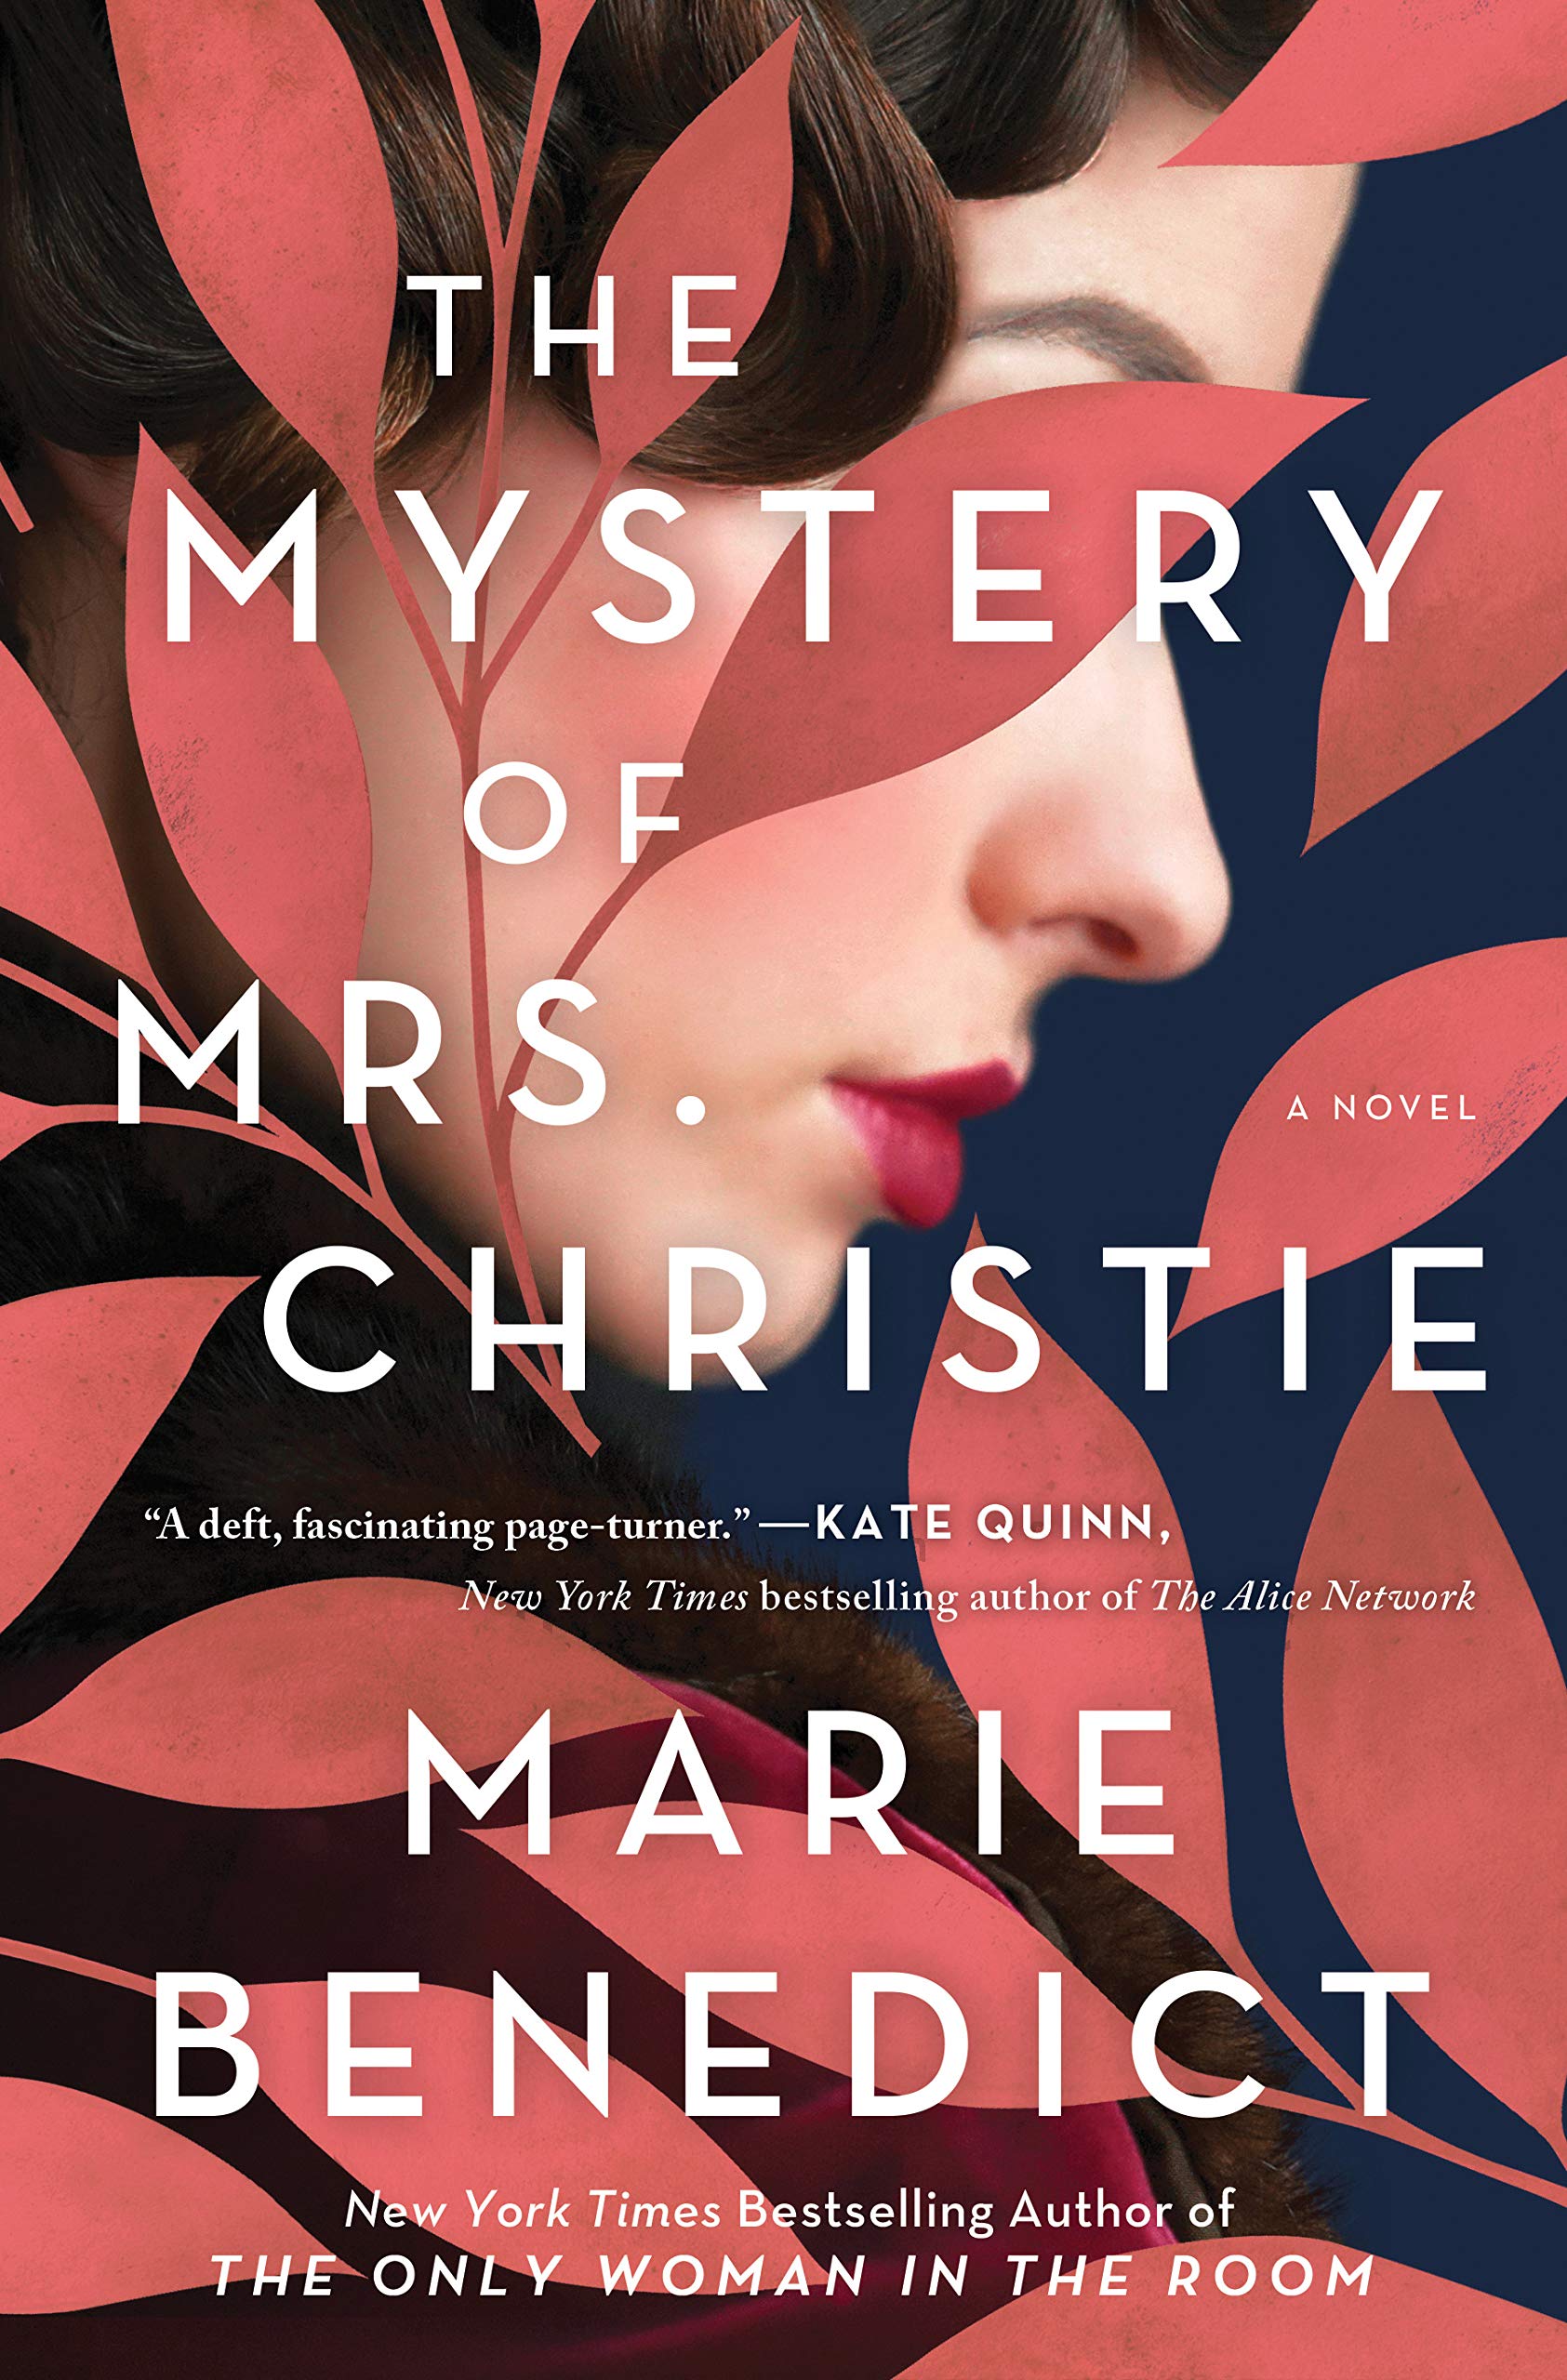 Cover of The Mystery of Mrs. Christie by Marie Benedict.